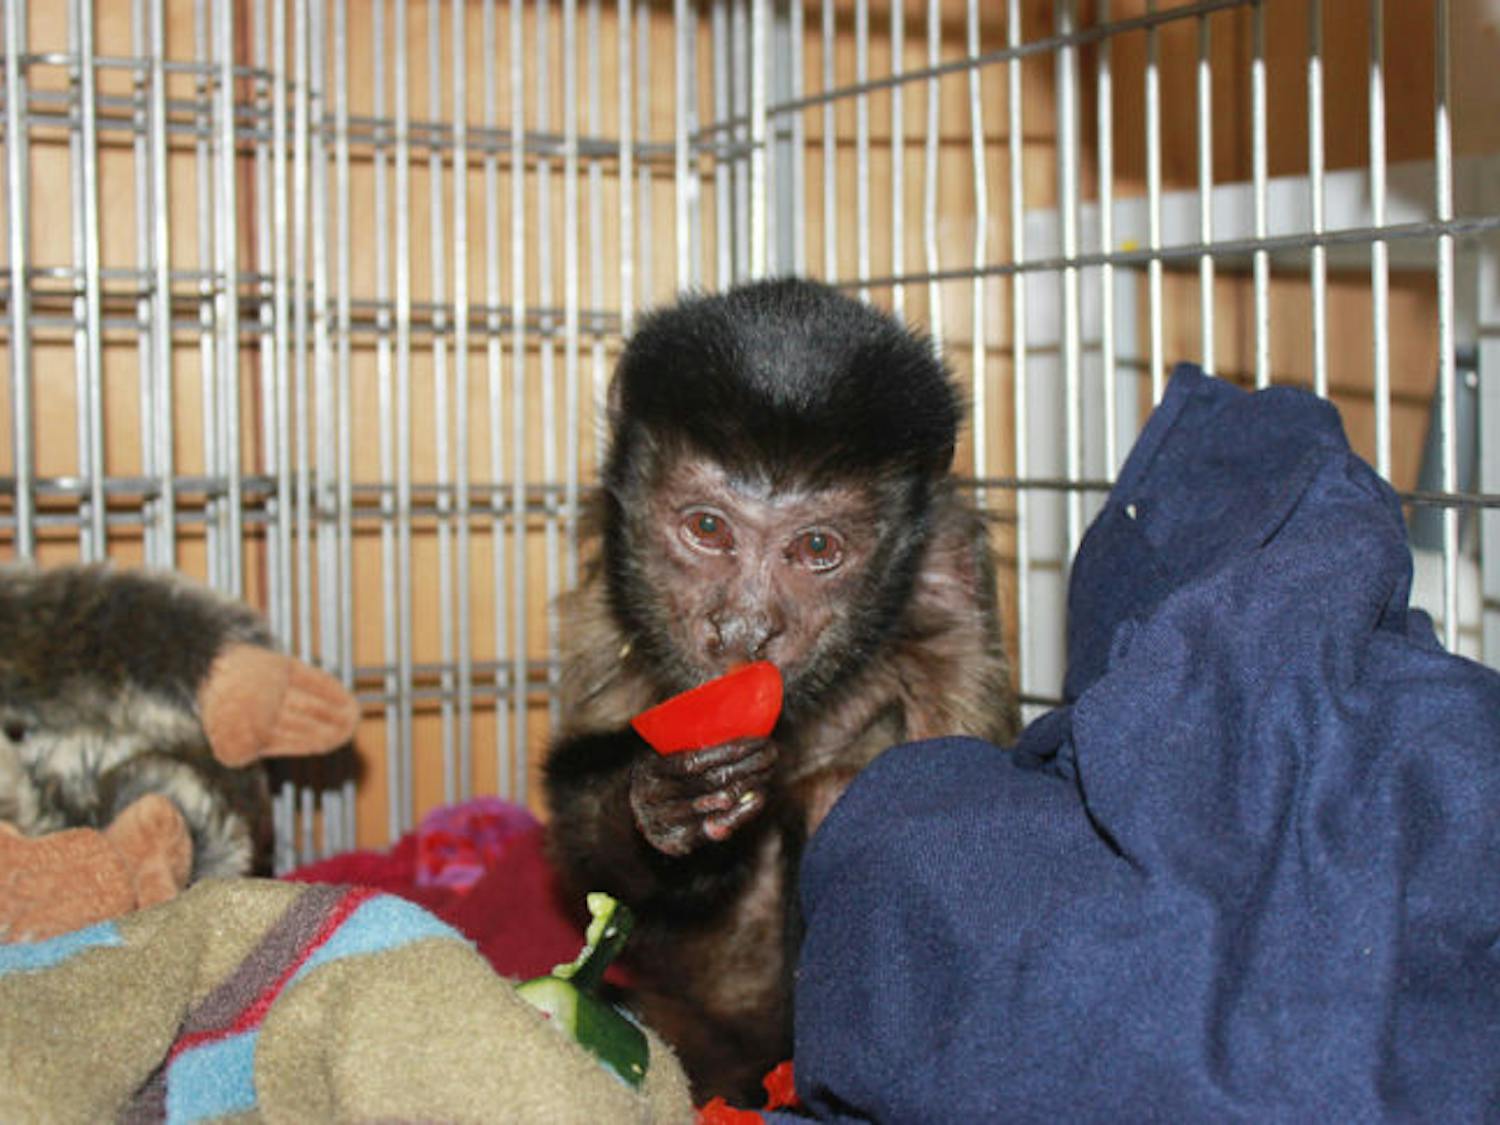 Wendell, a brown capuchin monkey living at the Jungle Friends Primate Sanctuary, was found blind Wednesday. Doctors determined high glucose levels cause Wendell temporarily blinded Wendell for four days. On Monday, the monkey regained his sight.